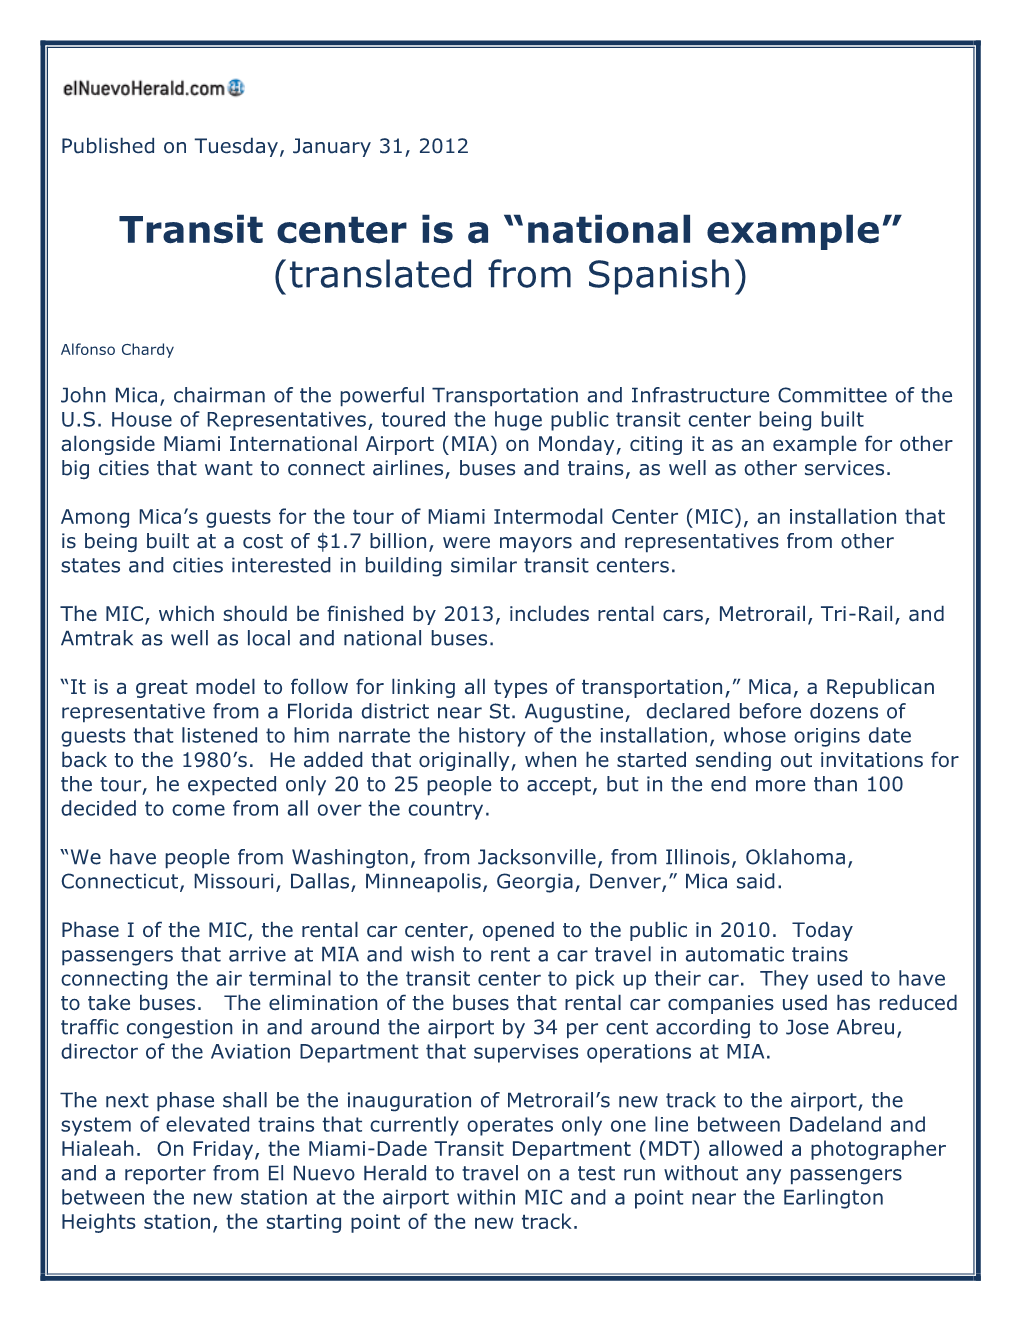 Transit Center Is a “National Example” (Translated from Spanish)